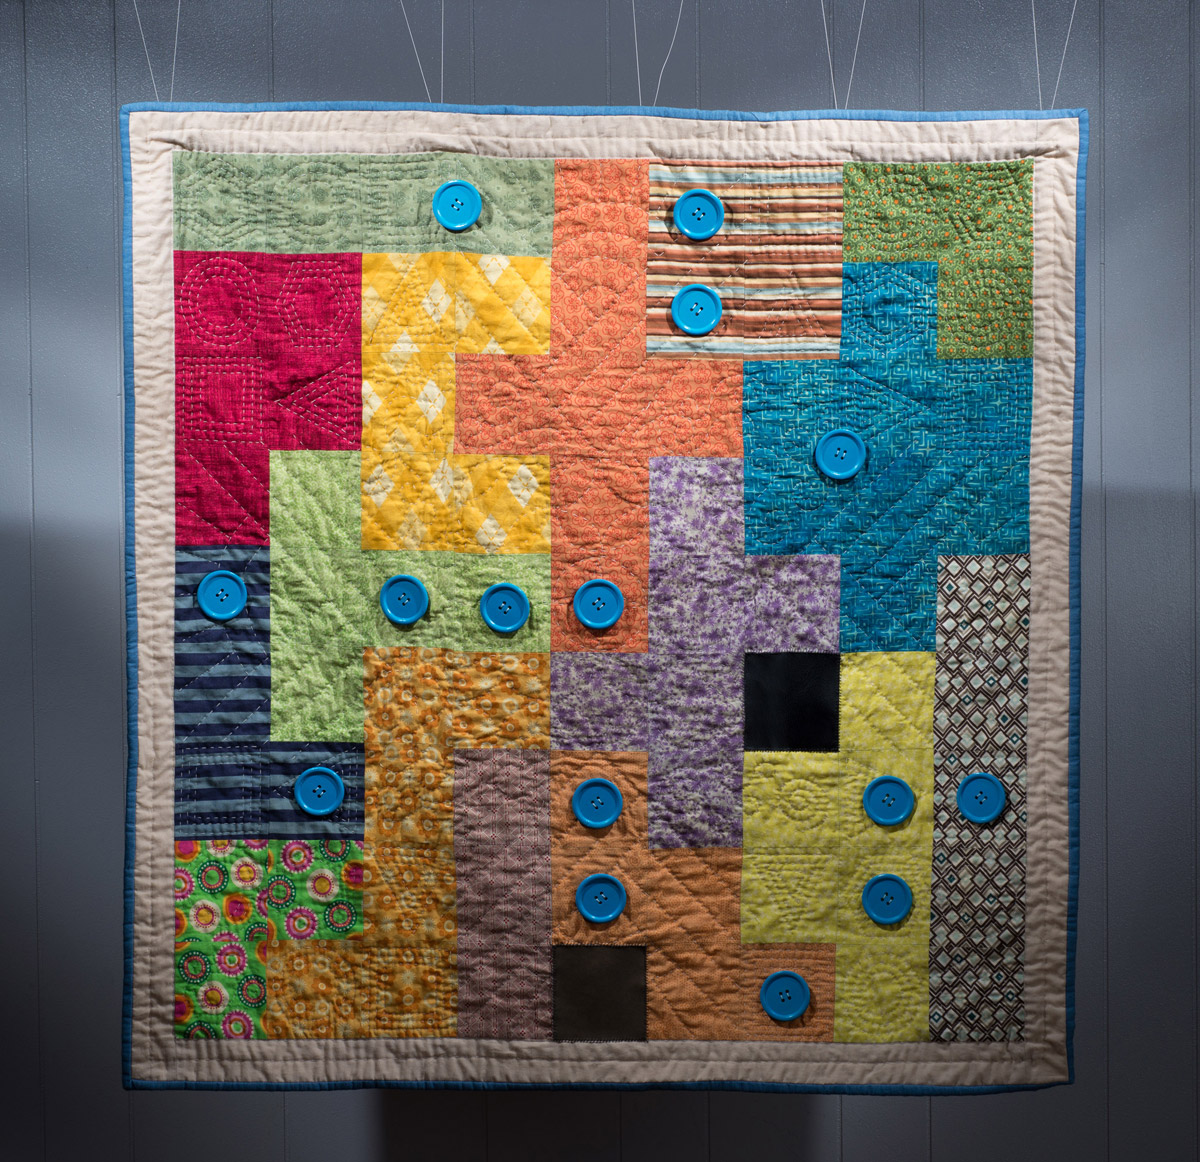 Final quilt based on the board game Patchwork.